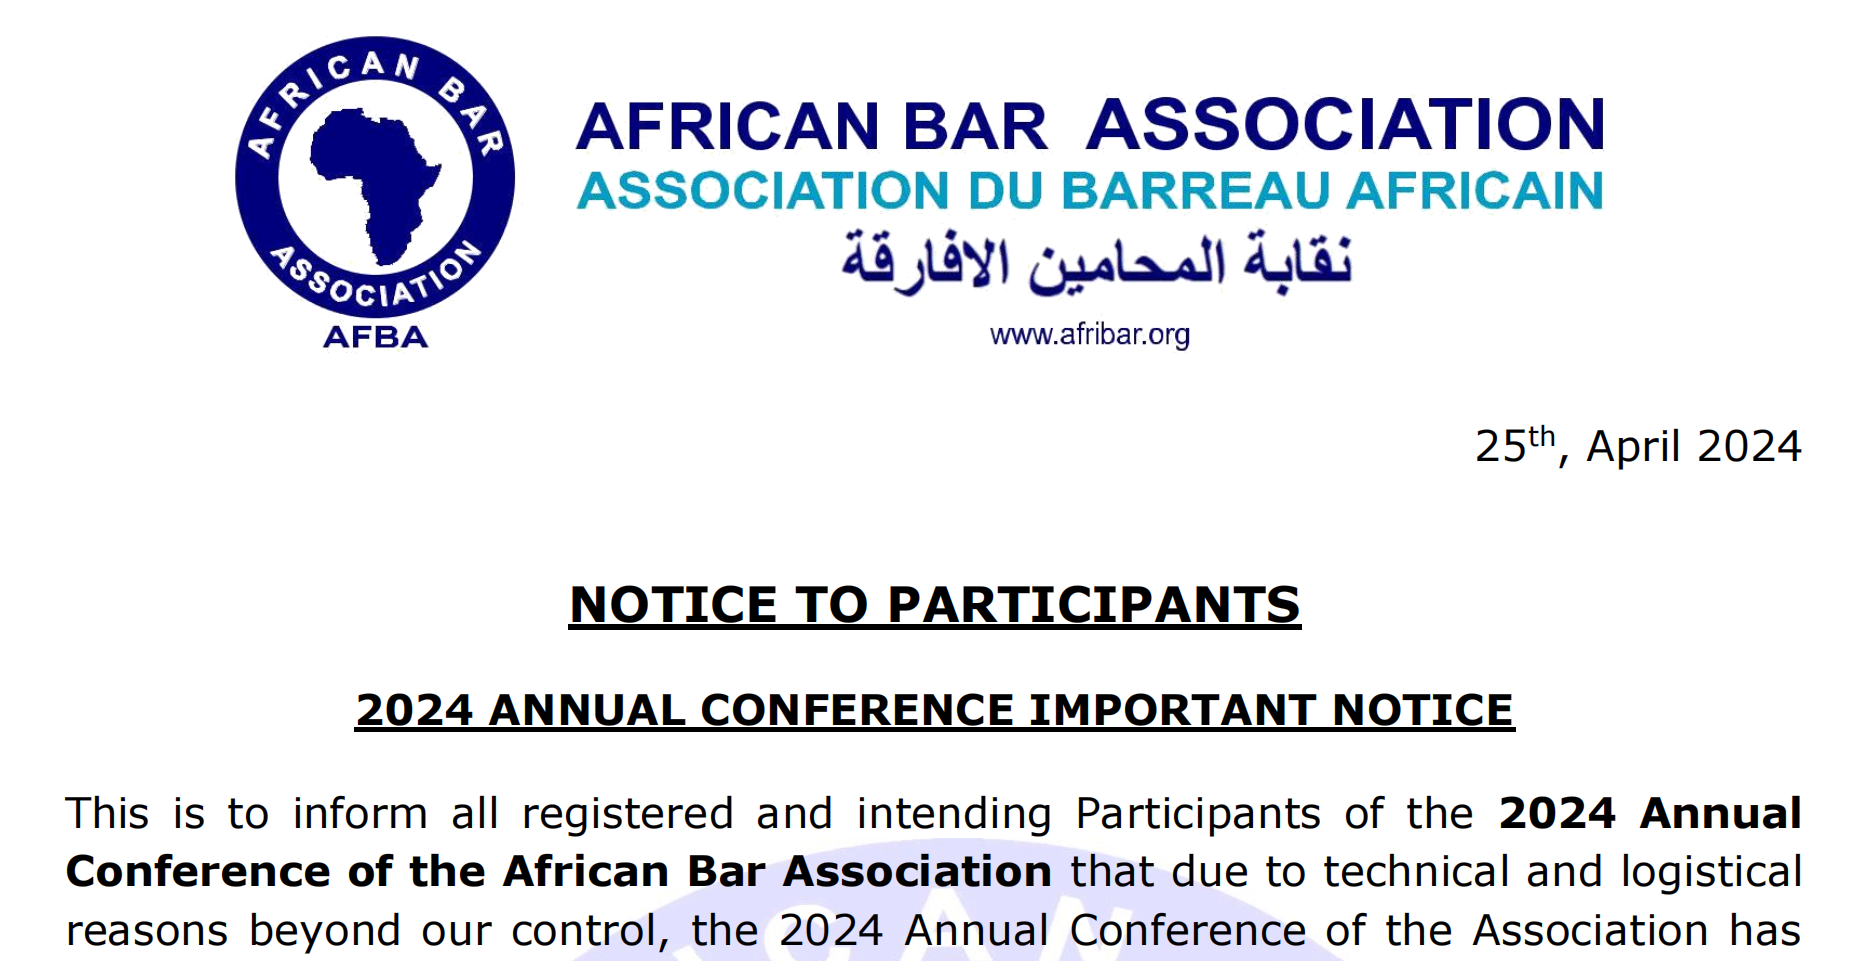 2024 ANNUAL CONFERENCE IMPORTANT NOTICE